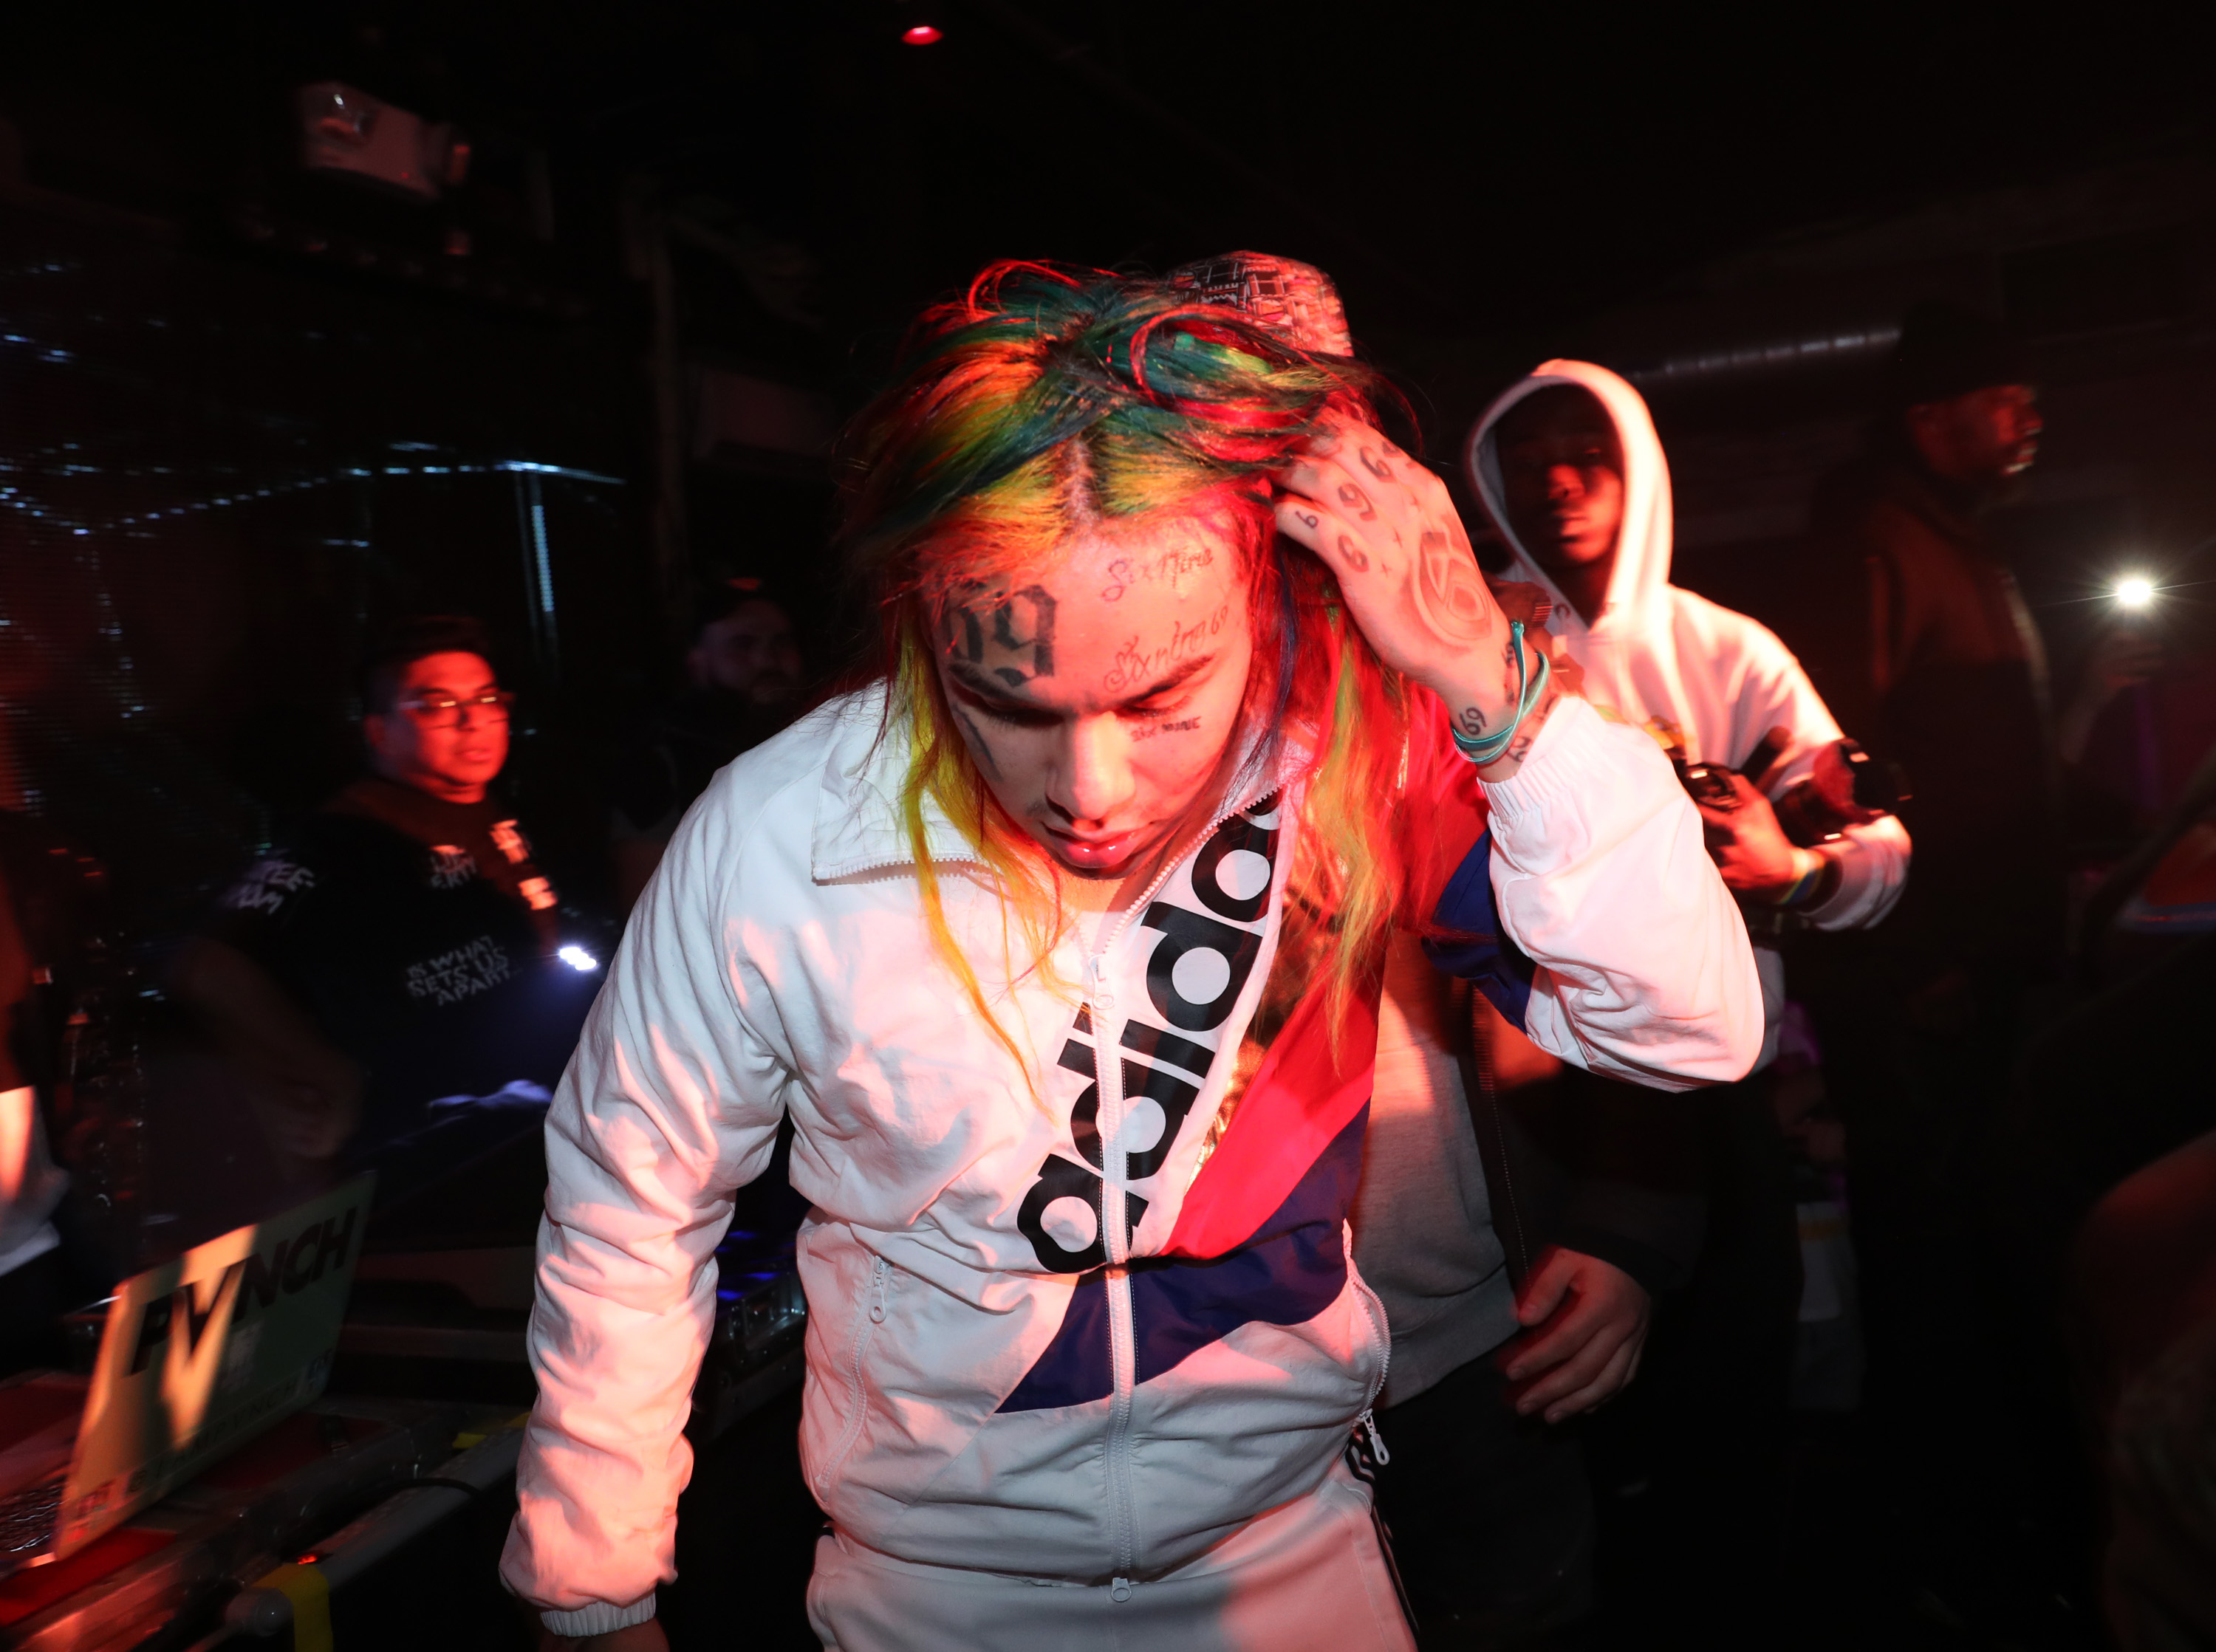 Tekashi 6ix9ine Hospitalized After Being Kidnapped And Pistol-Whipped: Report